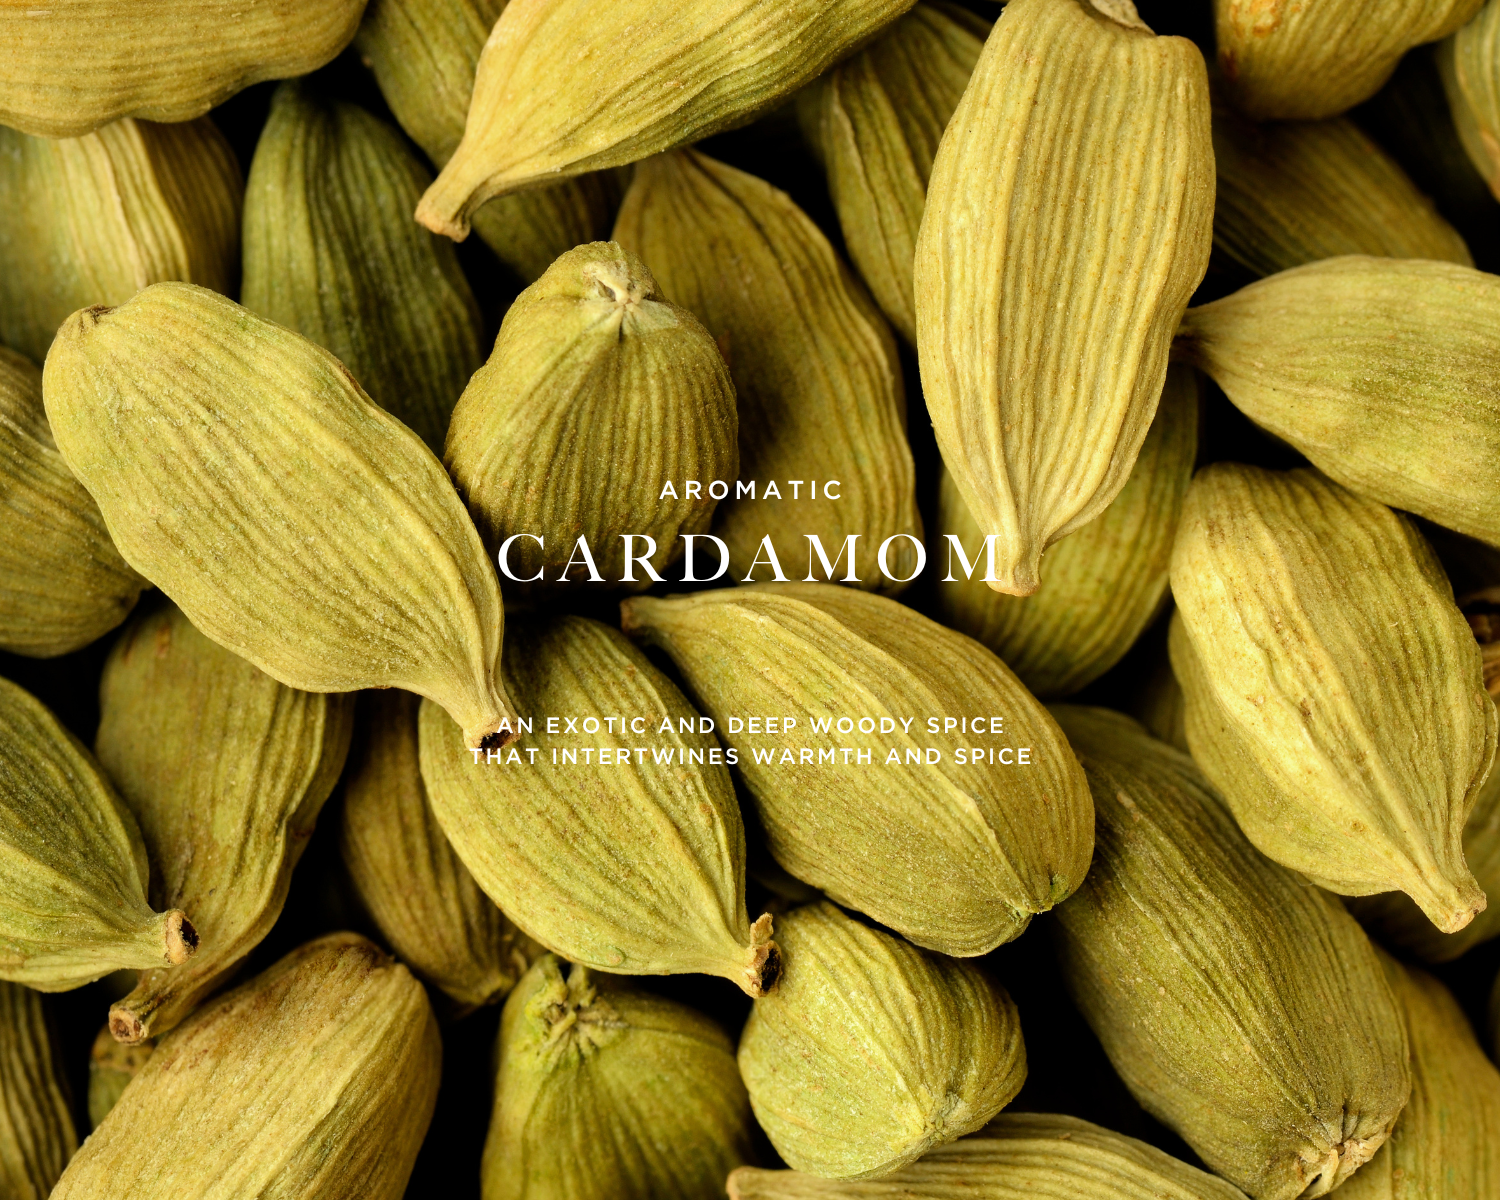 Caswell-Massey 2571 Eau de Parfum for Men: image of cardamon seed pods to show one of the scent notes